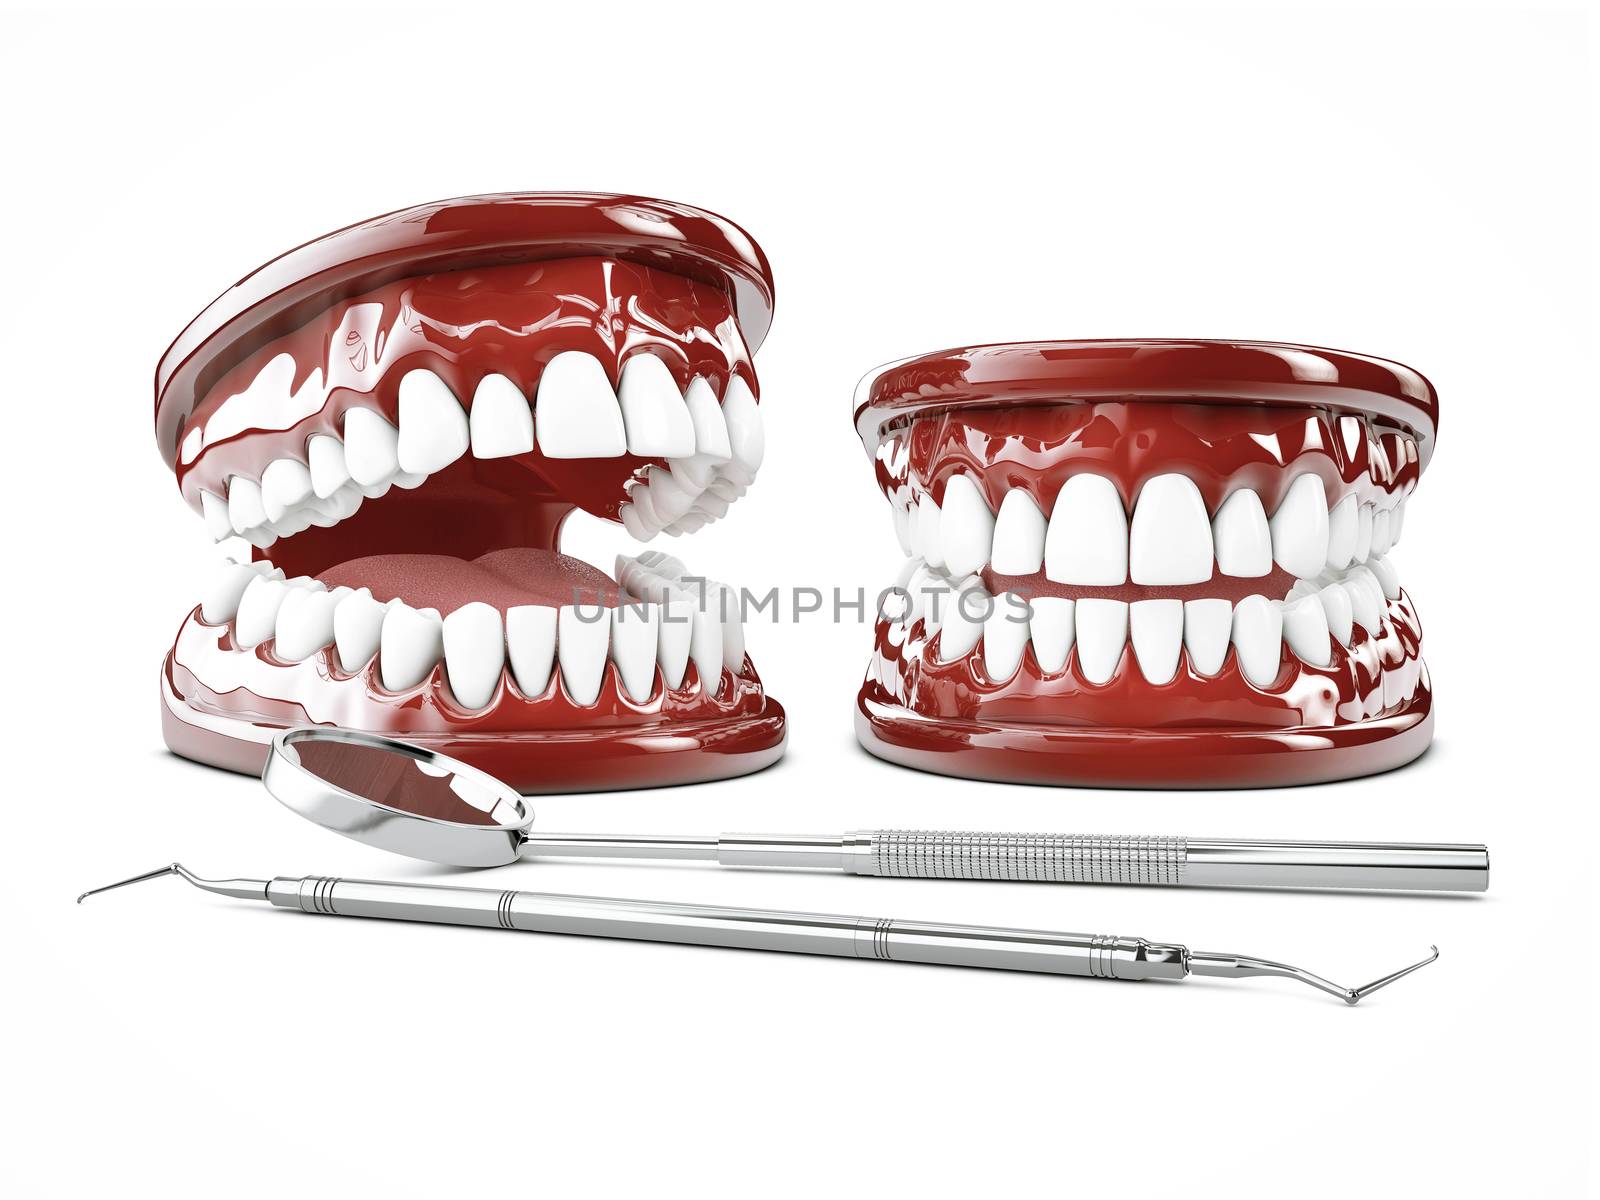 3d Illustration of human teeth, open and close mouth on white background by tussik